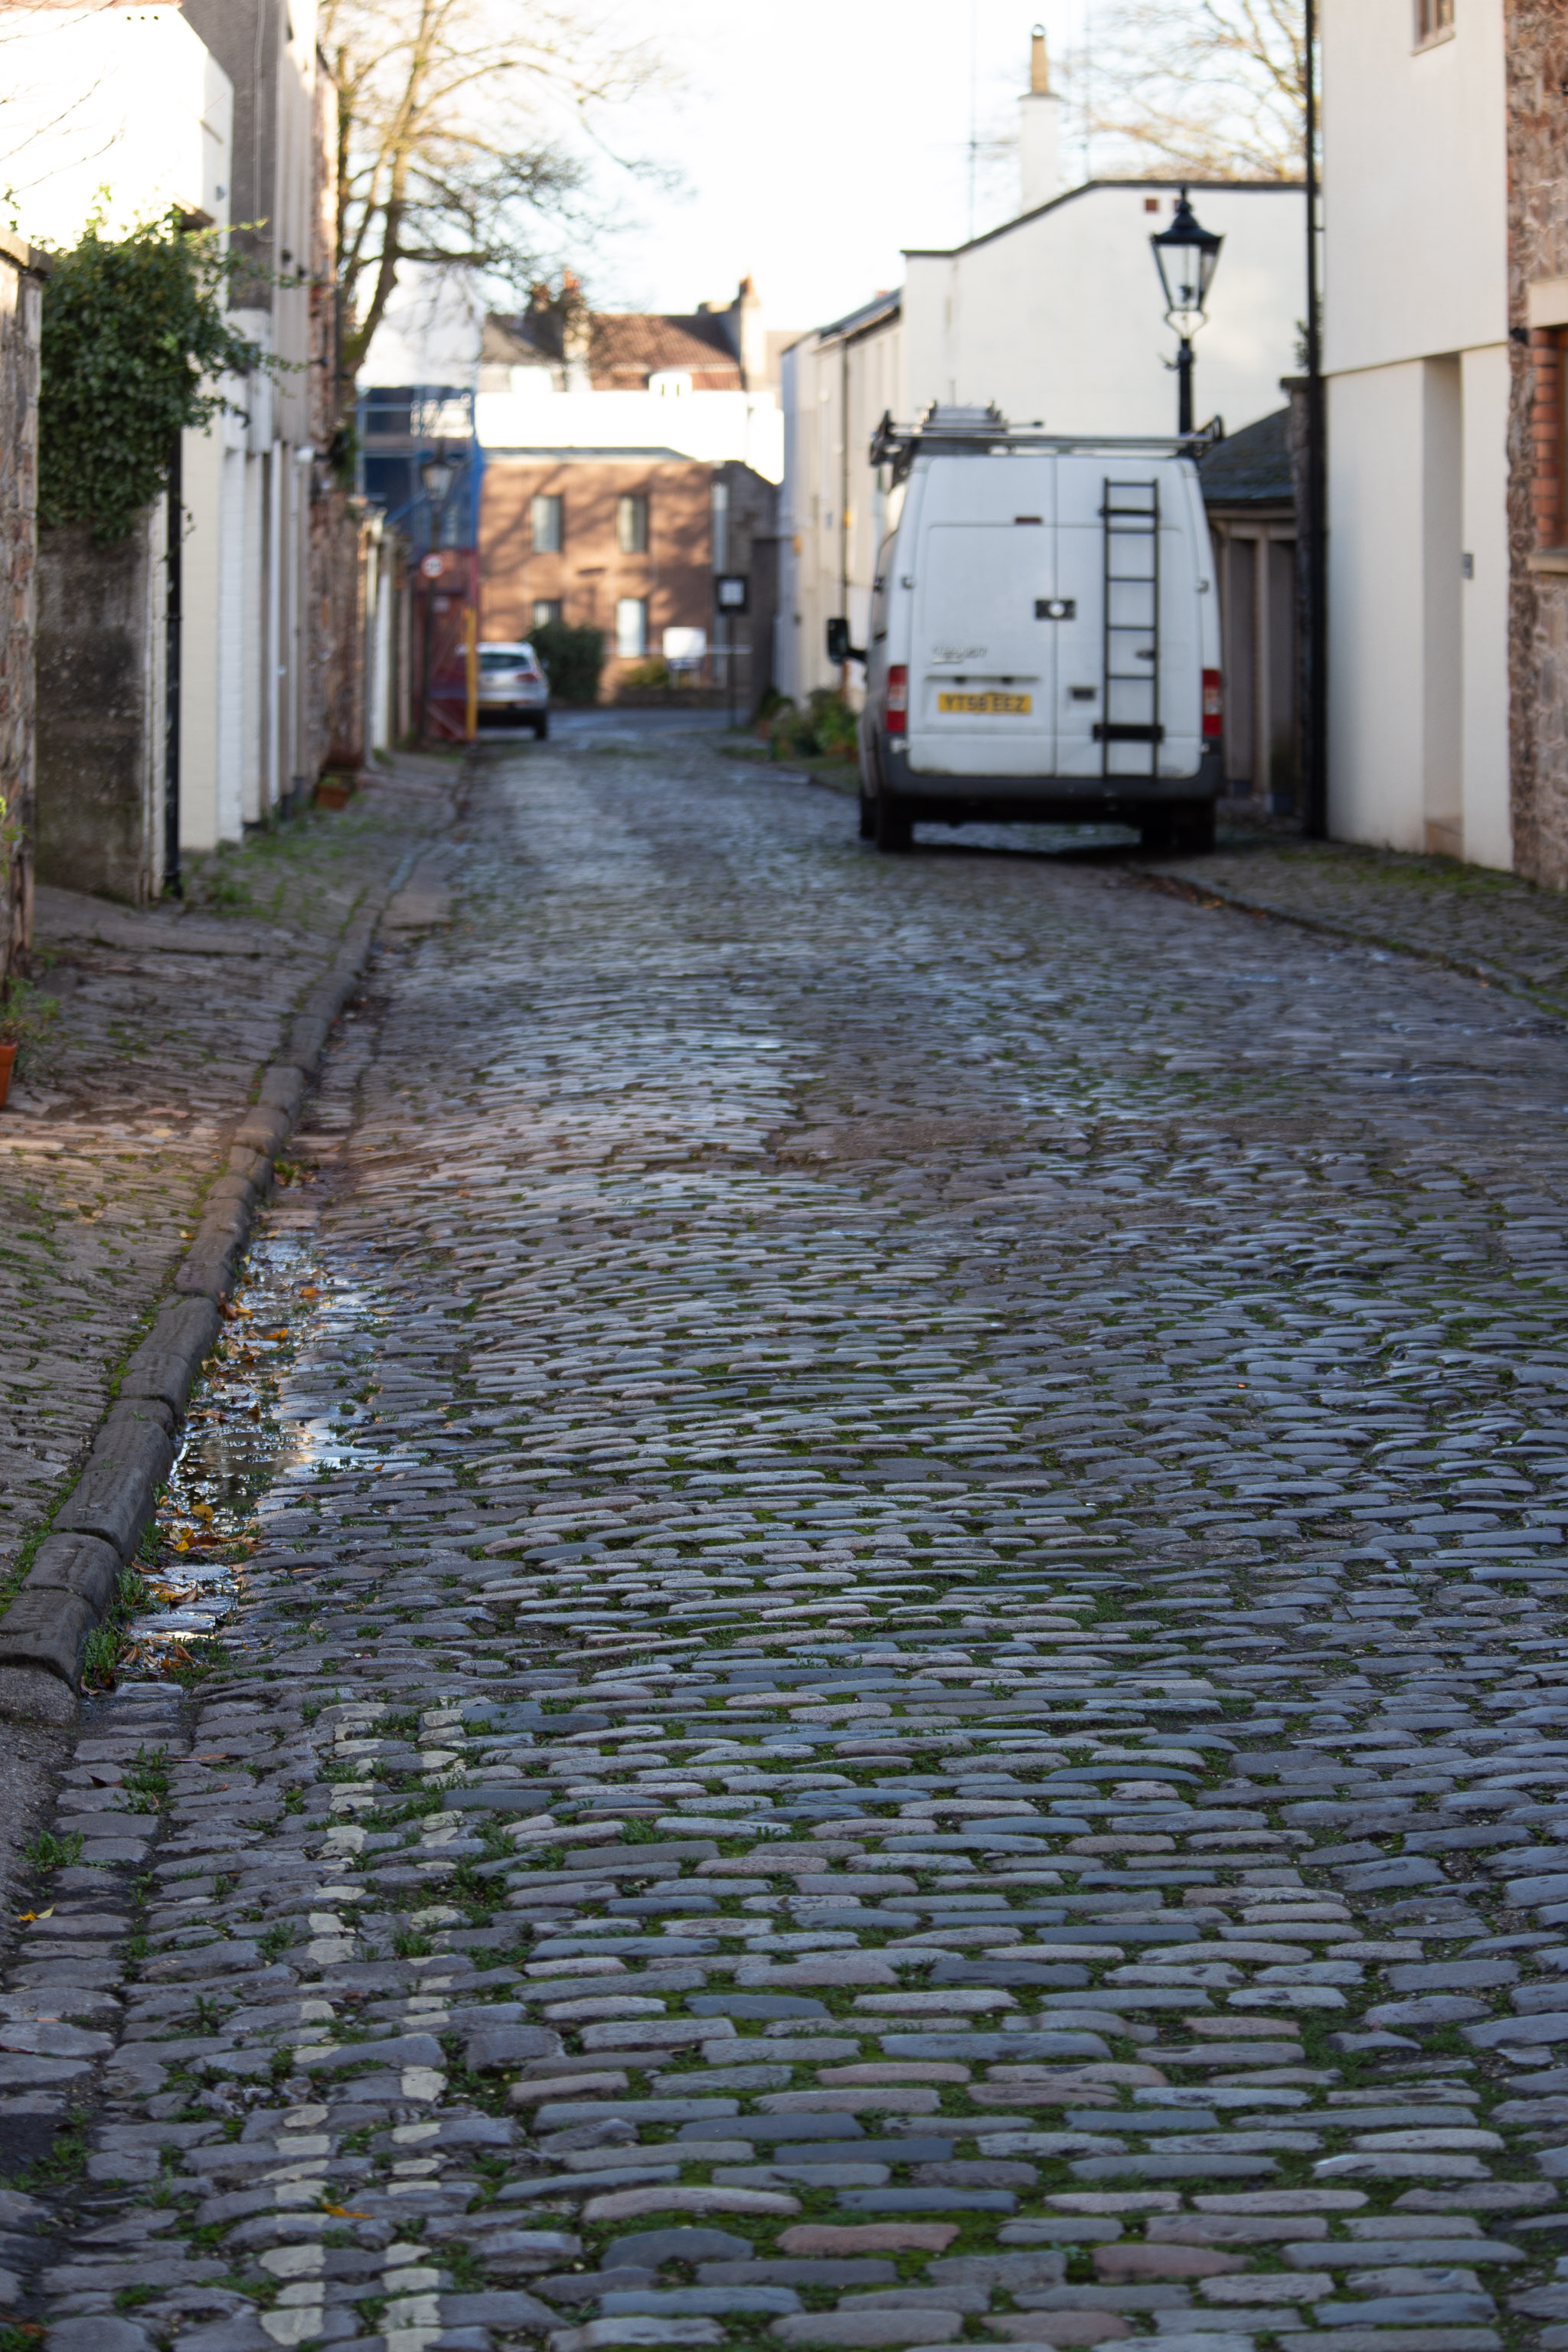 Cobblestone Mews
Though those are technically setts rather than cobbles, I think. Not that it makes any difference to the average person.
